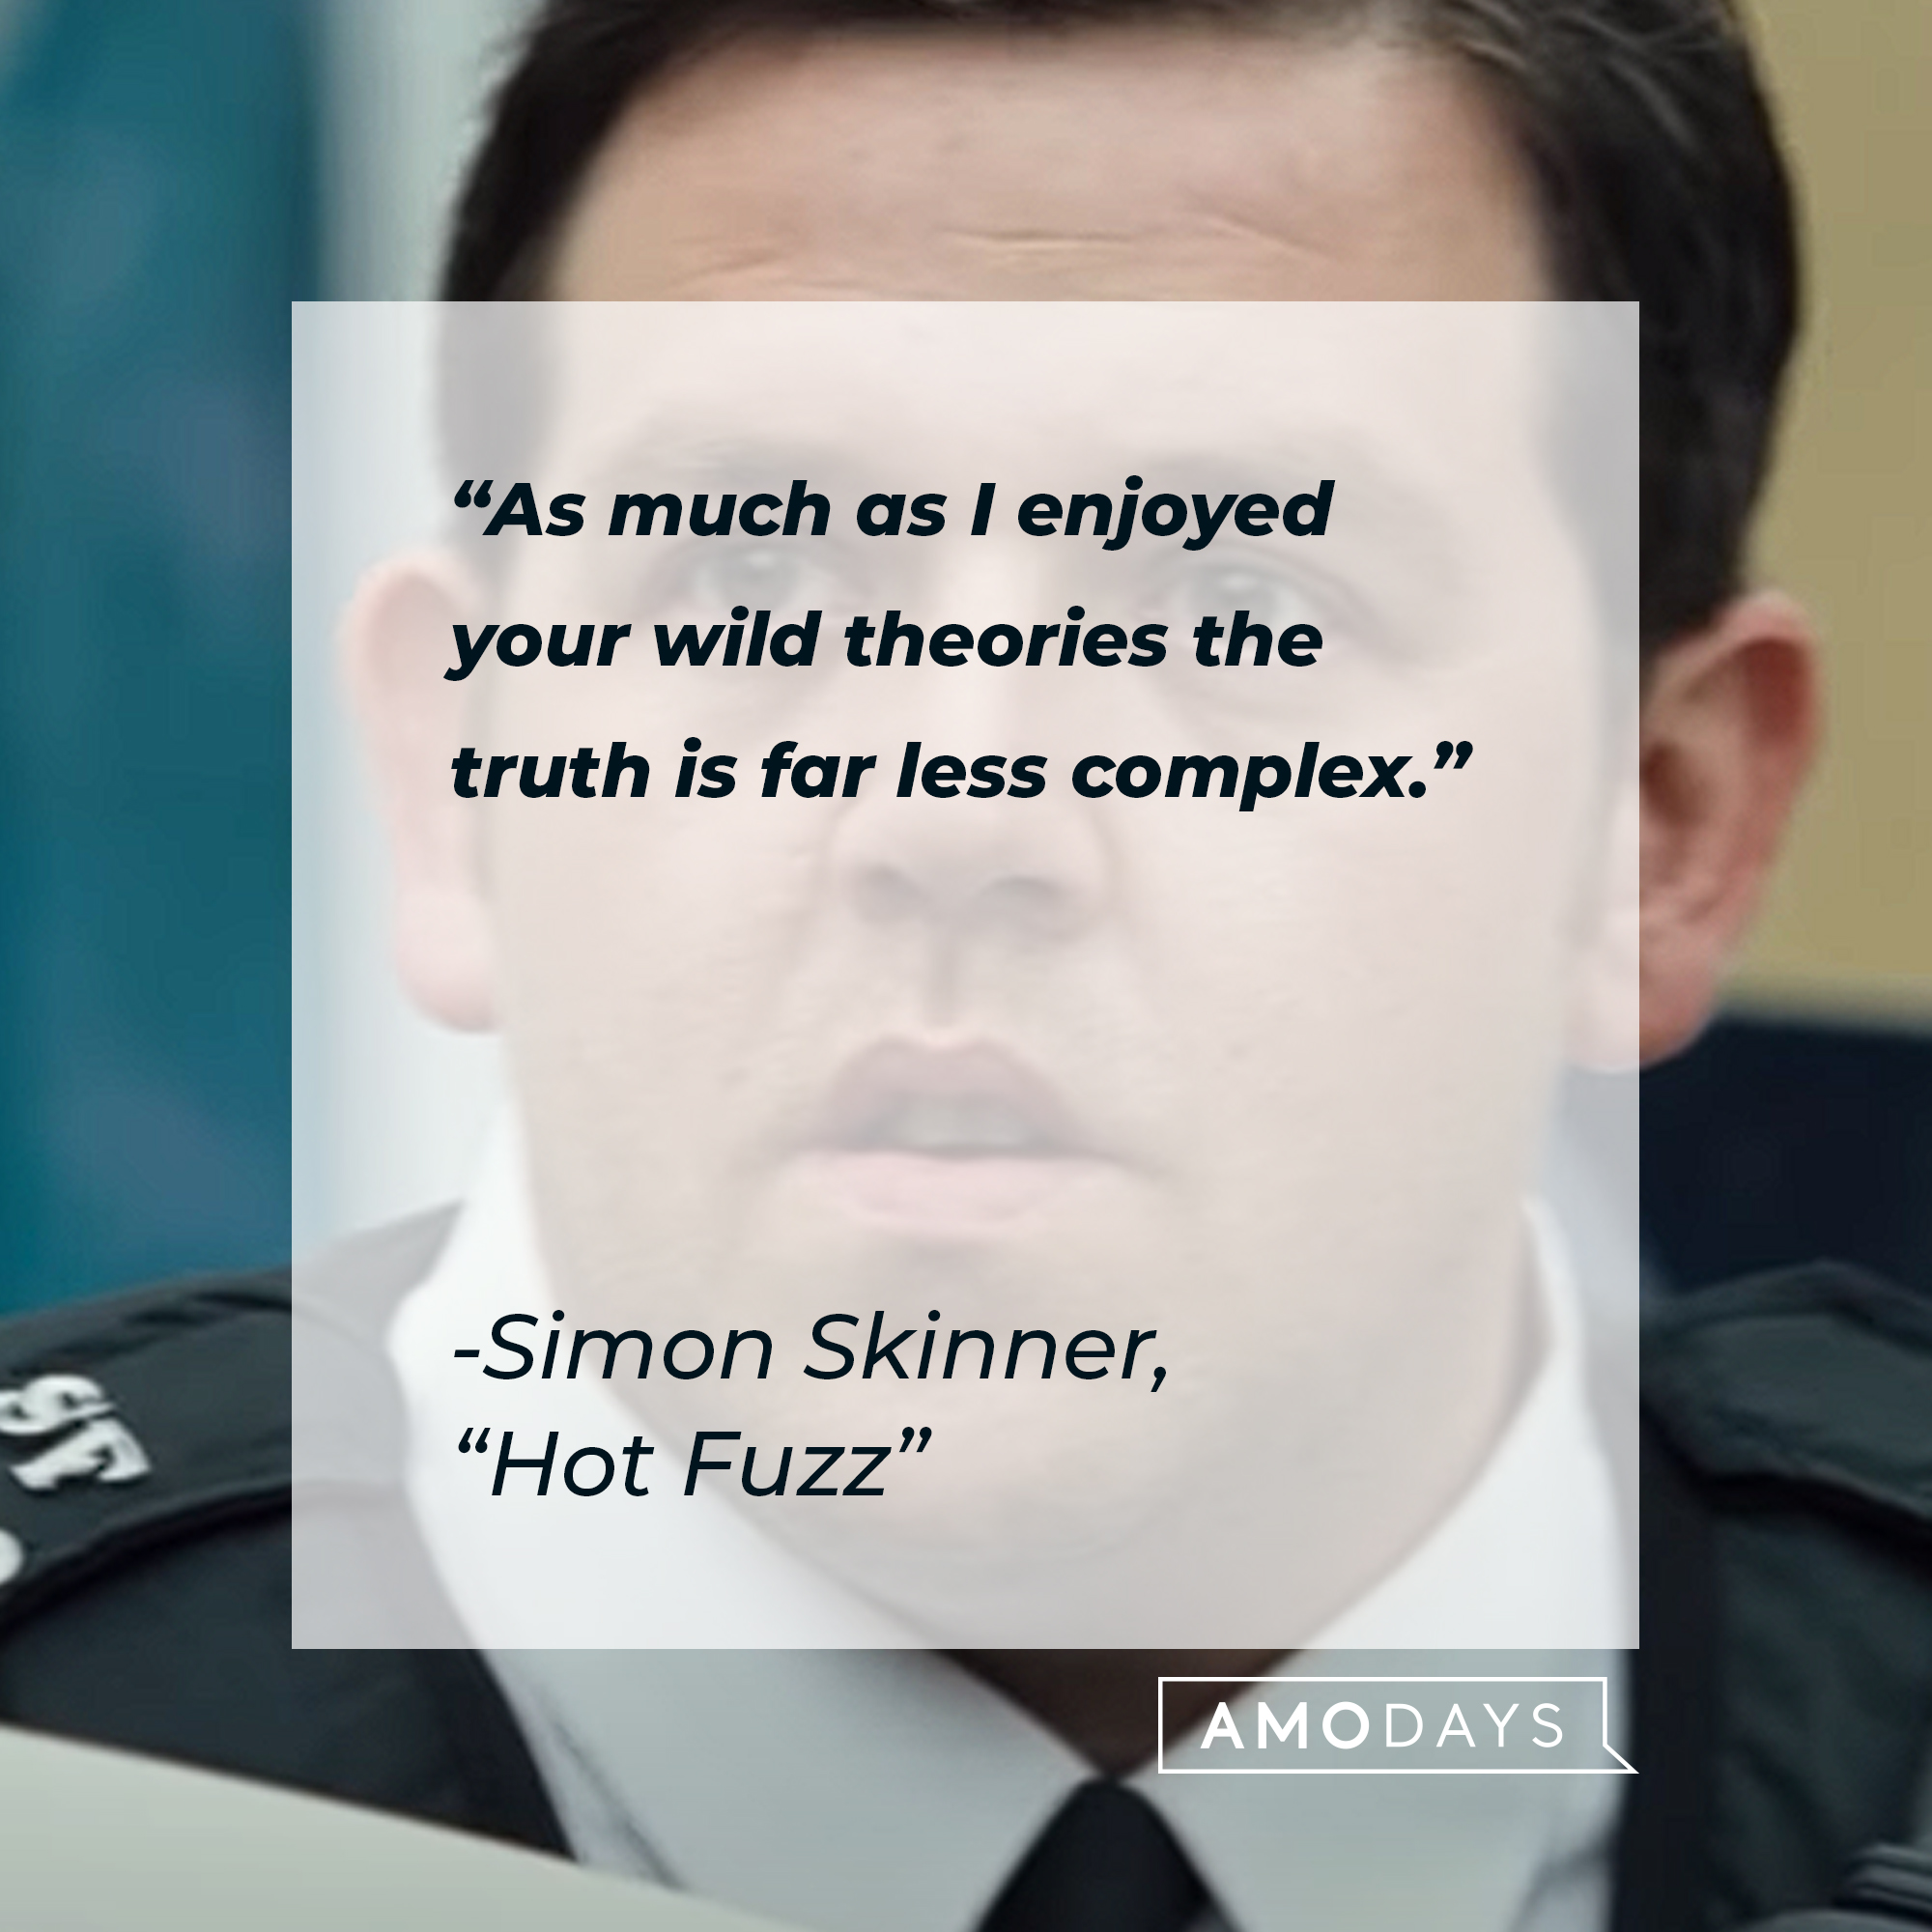 Simon Skinner's quote in "Hot Fuzz:" “As much as I enjoyed your wild theories the truth is far less complex.” | Source: Youtube.com/UniversalPictures